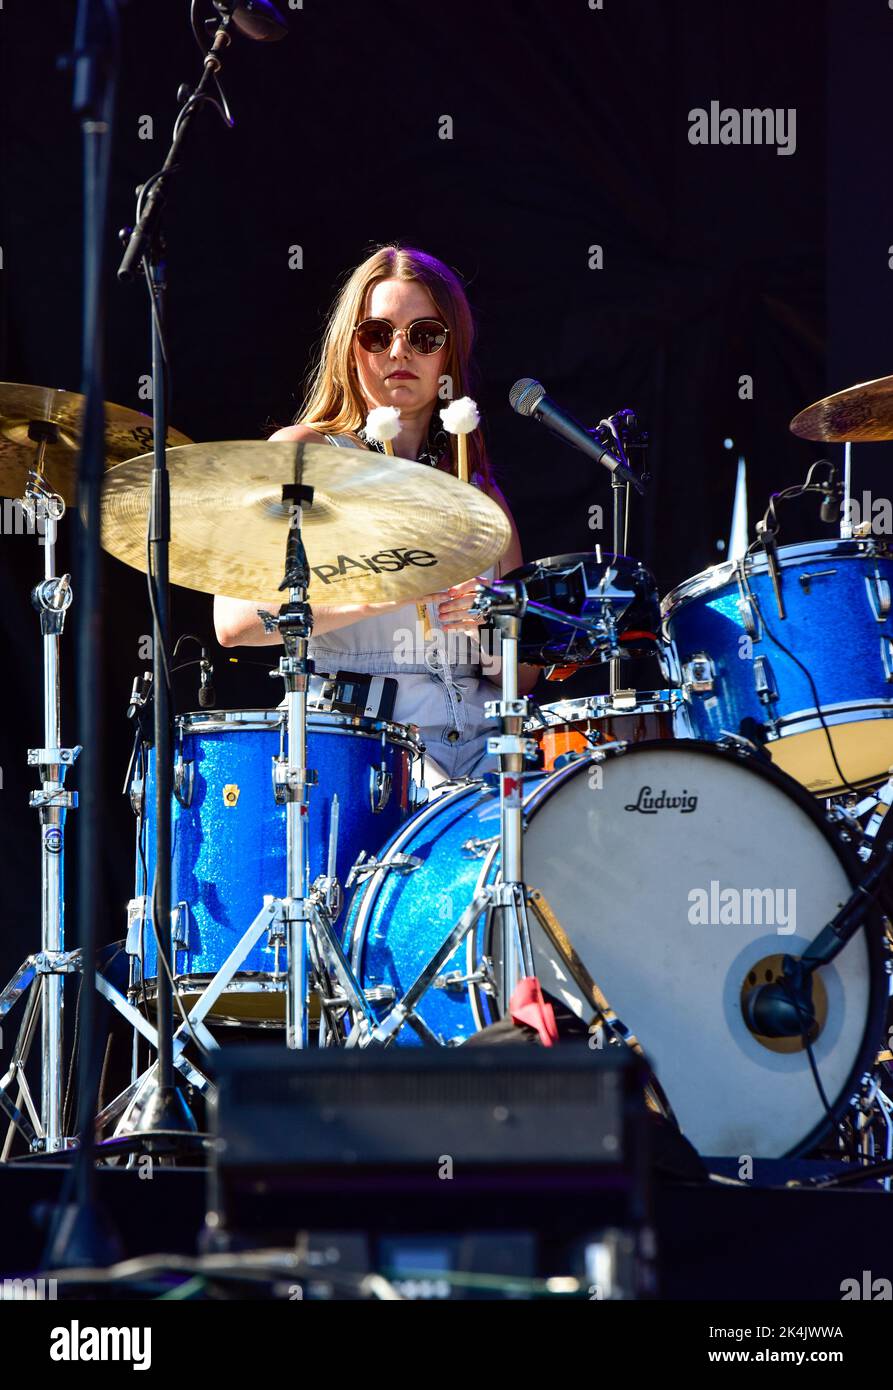 Redondo Beach, California September 17, 2022 - The Drummer for Cam performing on stage at BeachLife Ranch, Credit - Ken Howard/Alamy Stock Photo